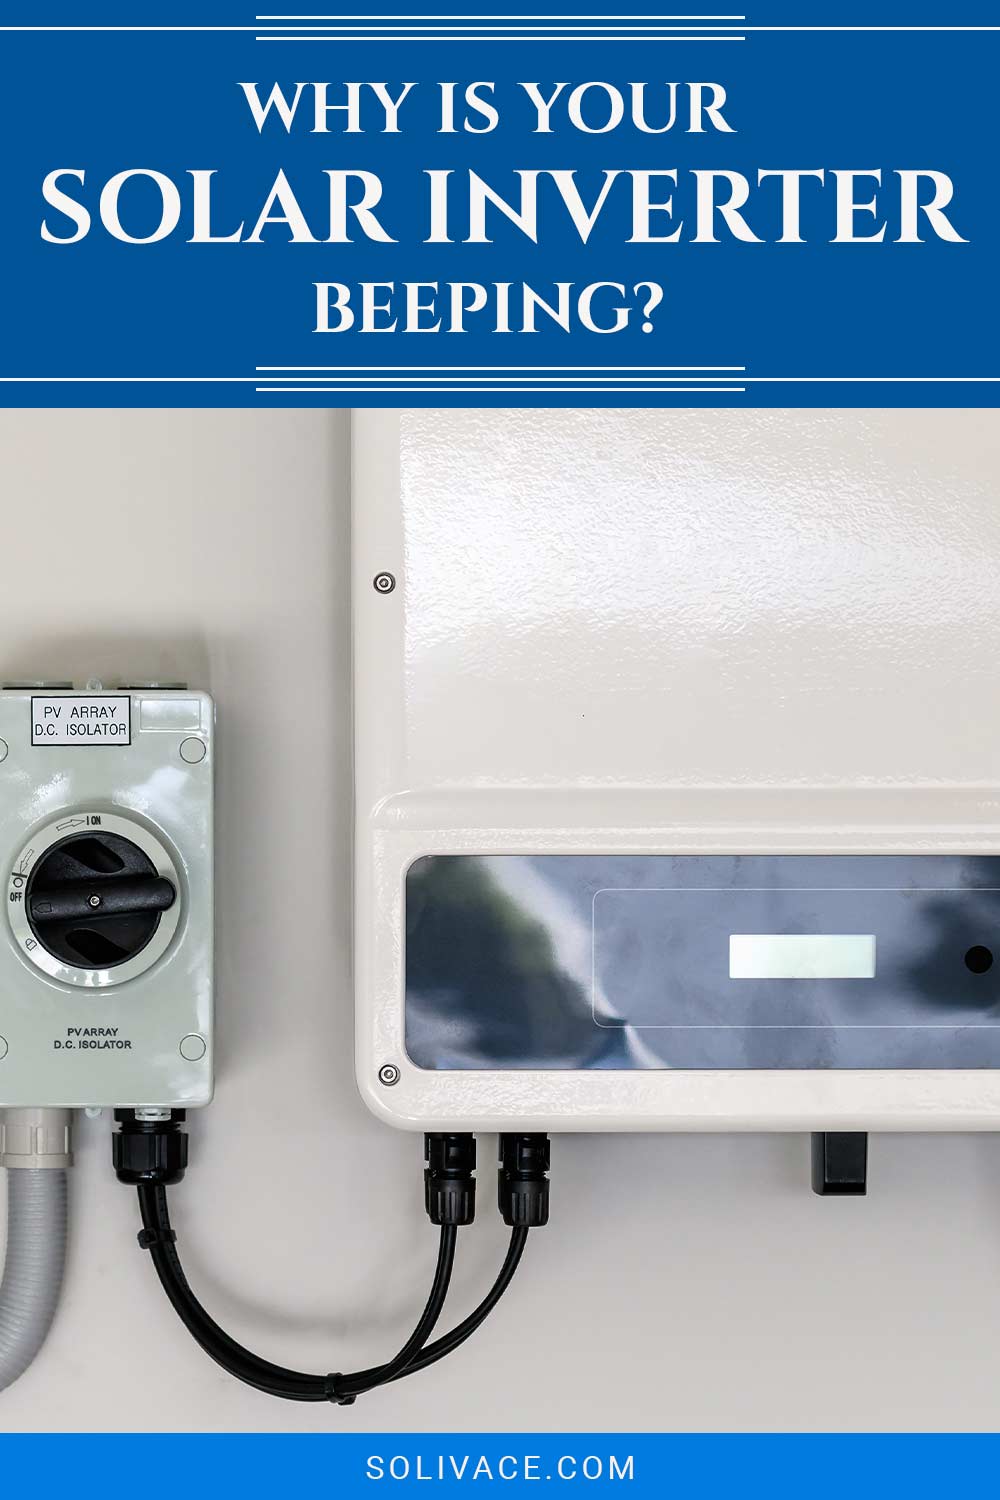 Why Is Your Solar Inverter Beeping?